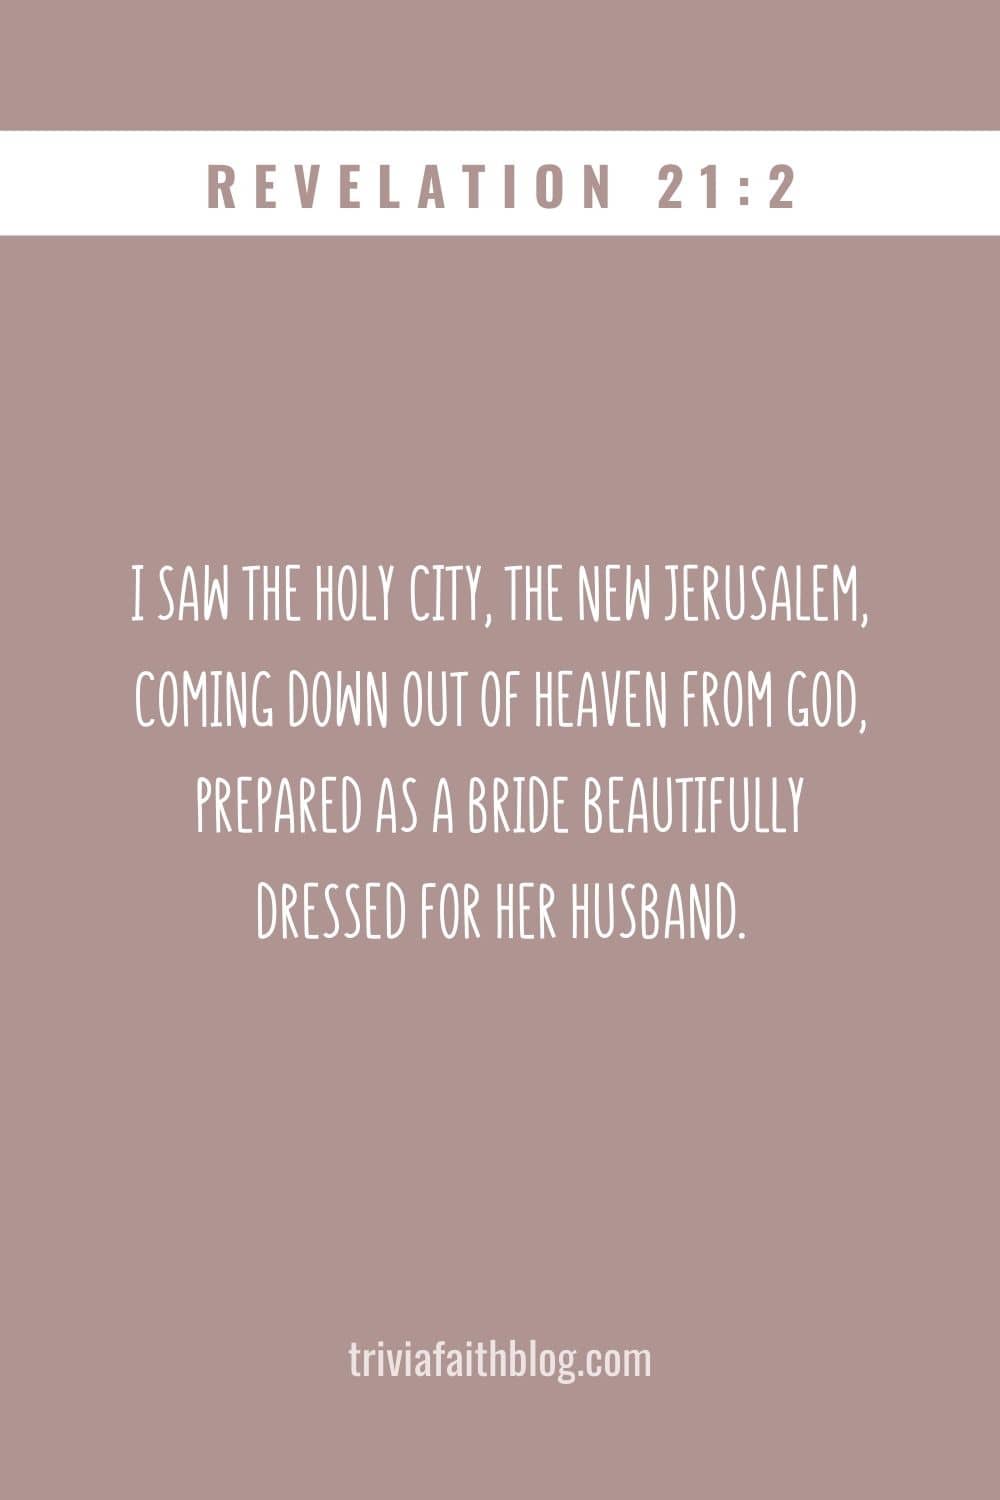 I saw the Holy City, the new Jerusalem, coming down out of heaven from God, prepared as a bride beautifully dressed for her husband